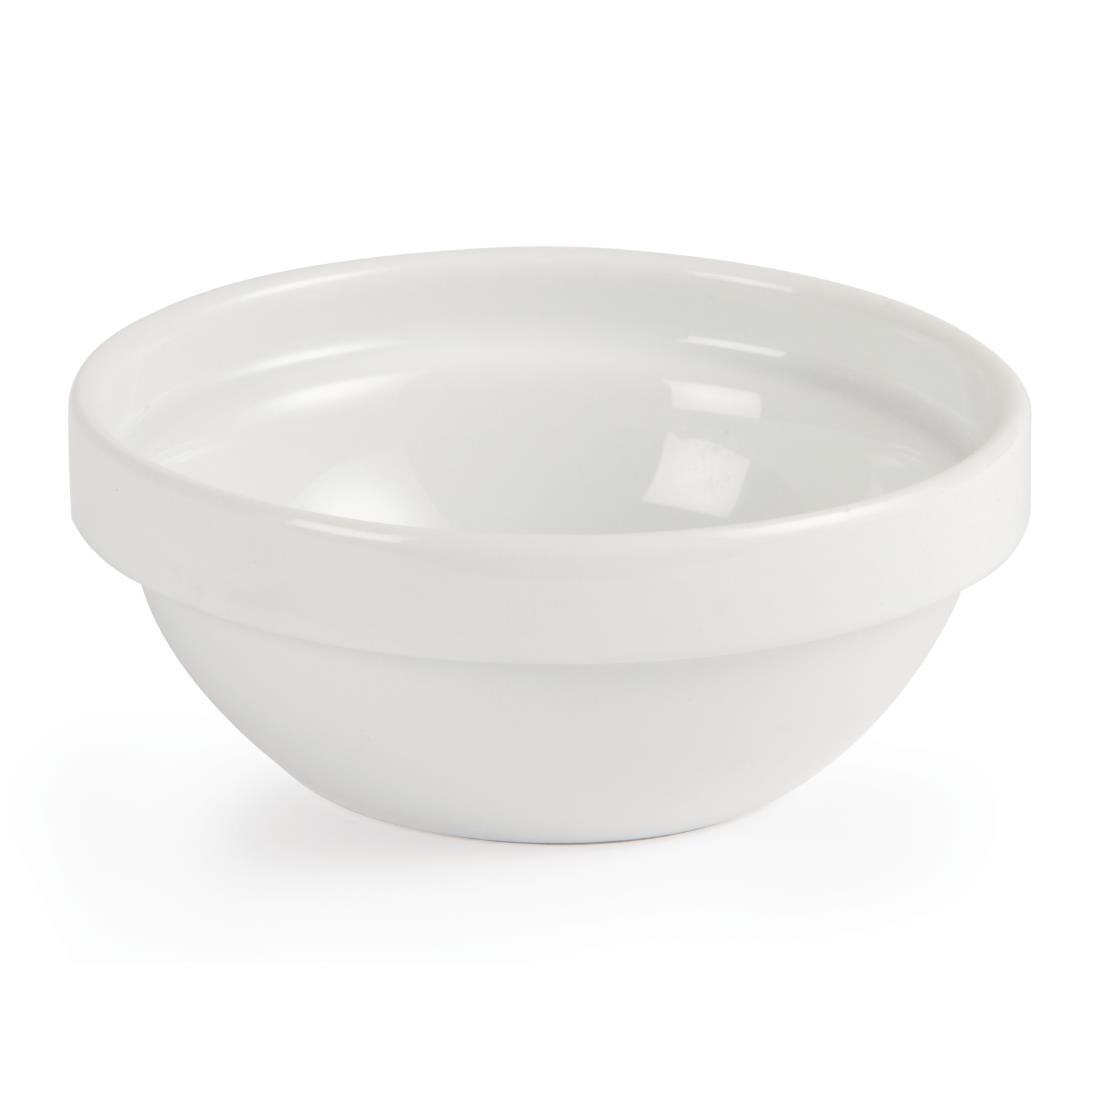 Olympia Fruit Bowls (Pack of 12) - CE531  - 2